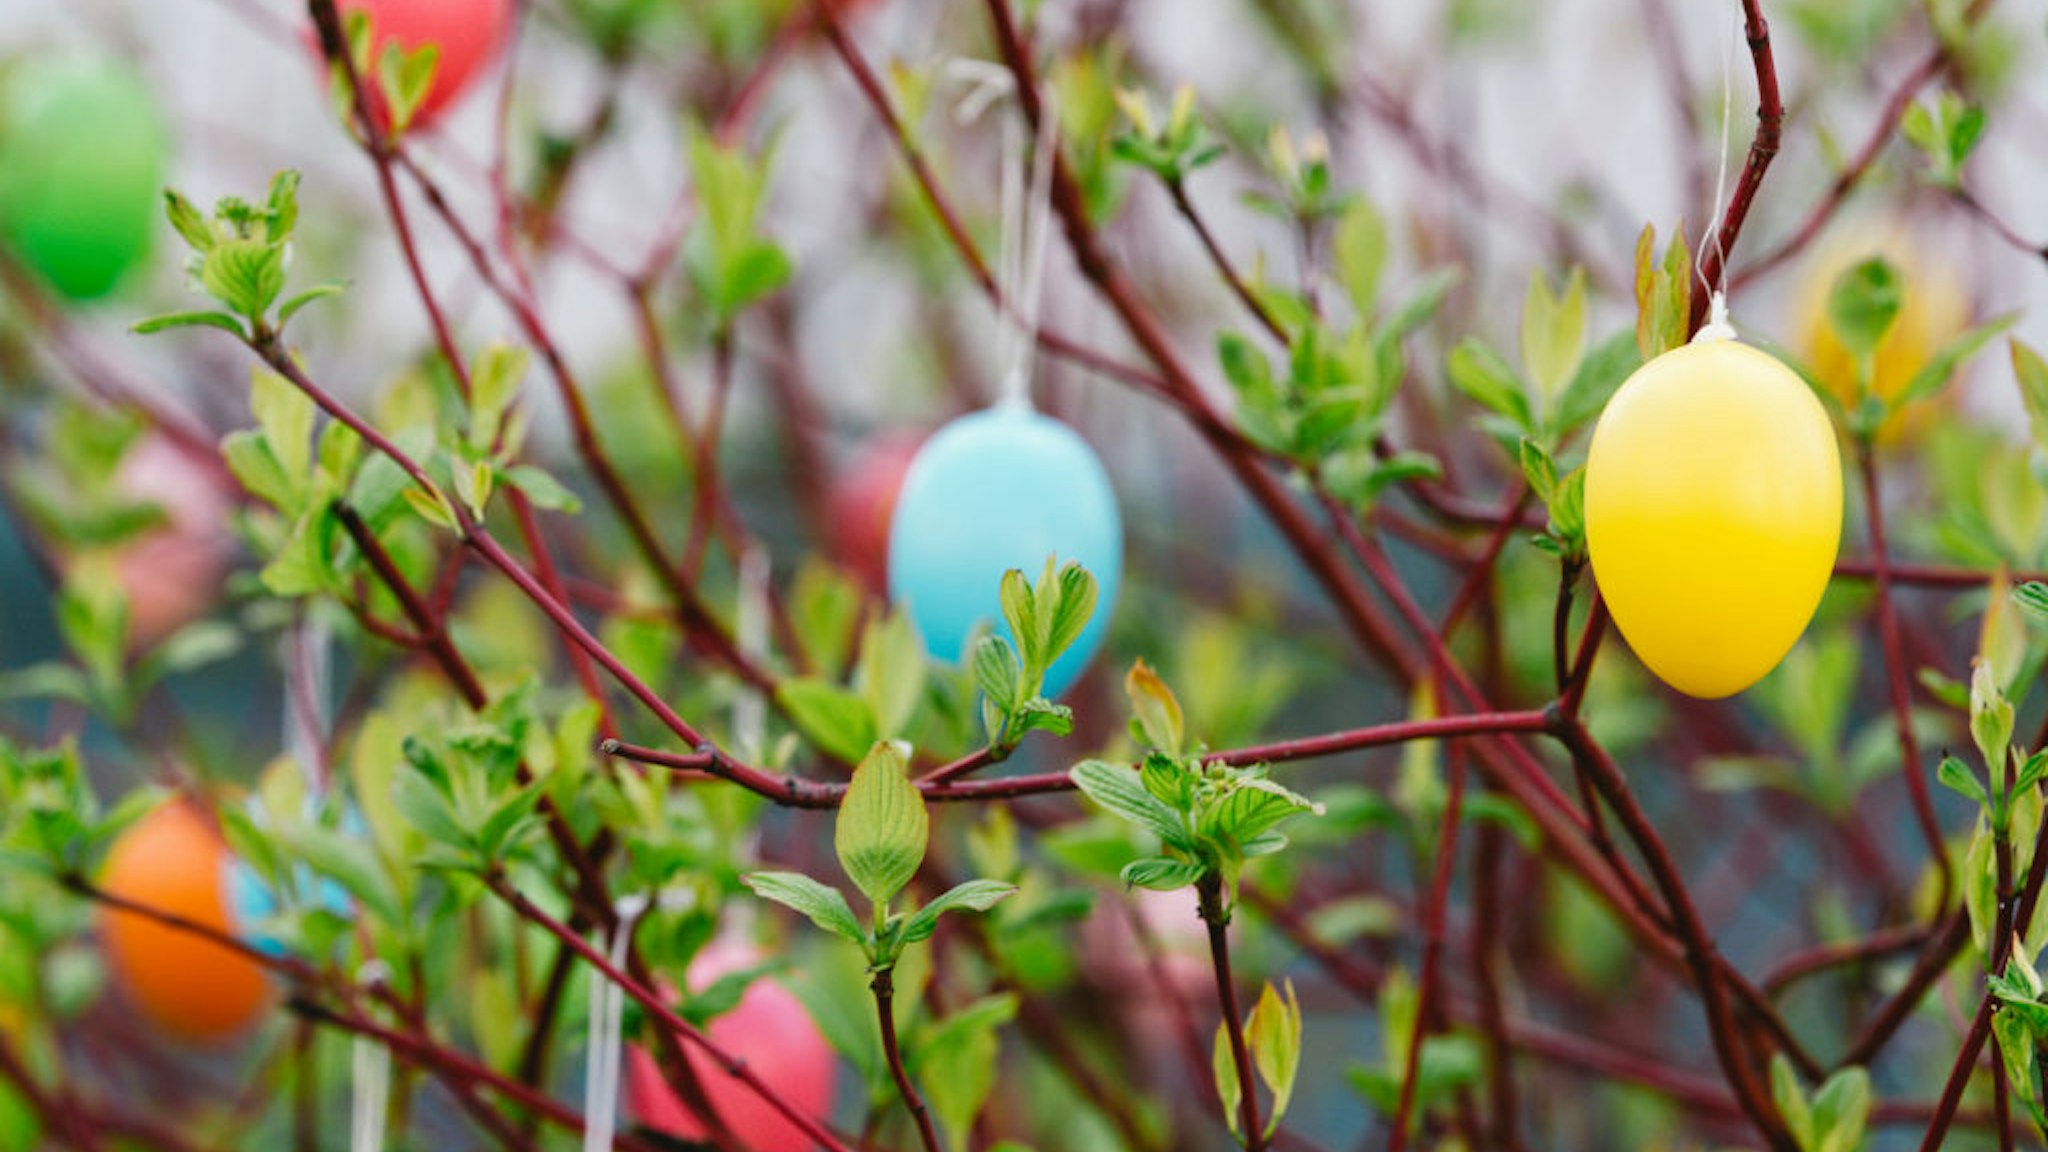 Easter eggs hang on a tree in Cologne, Germany on March 24, 2021